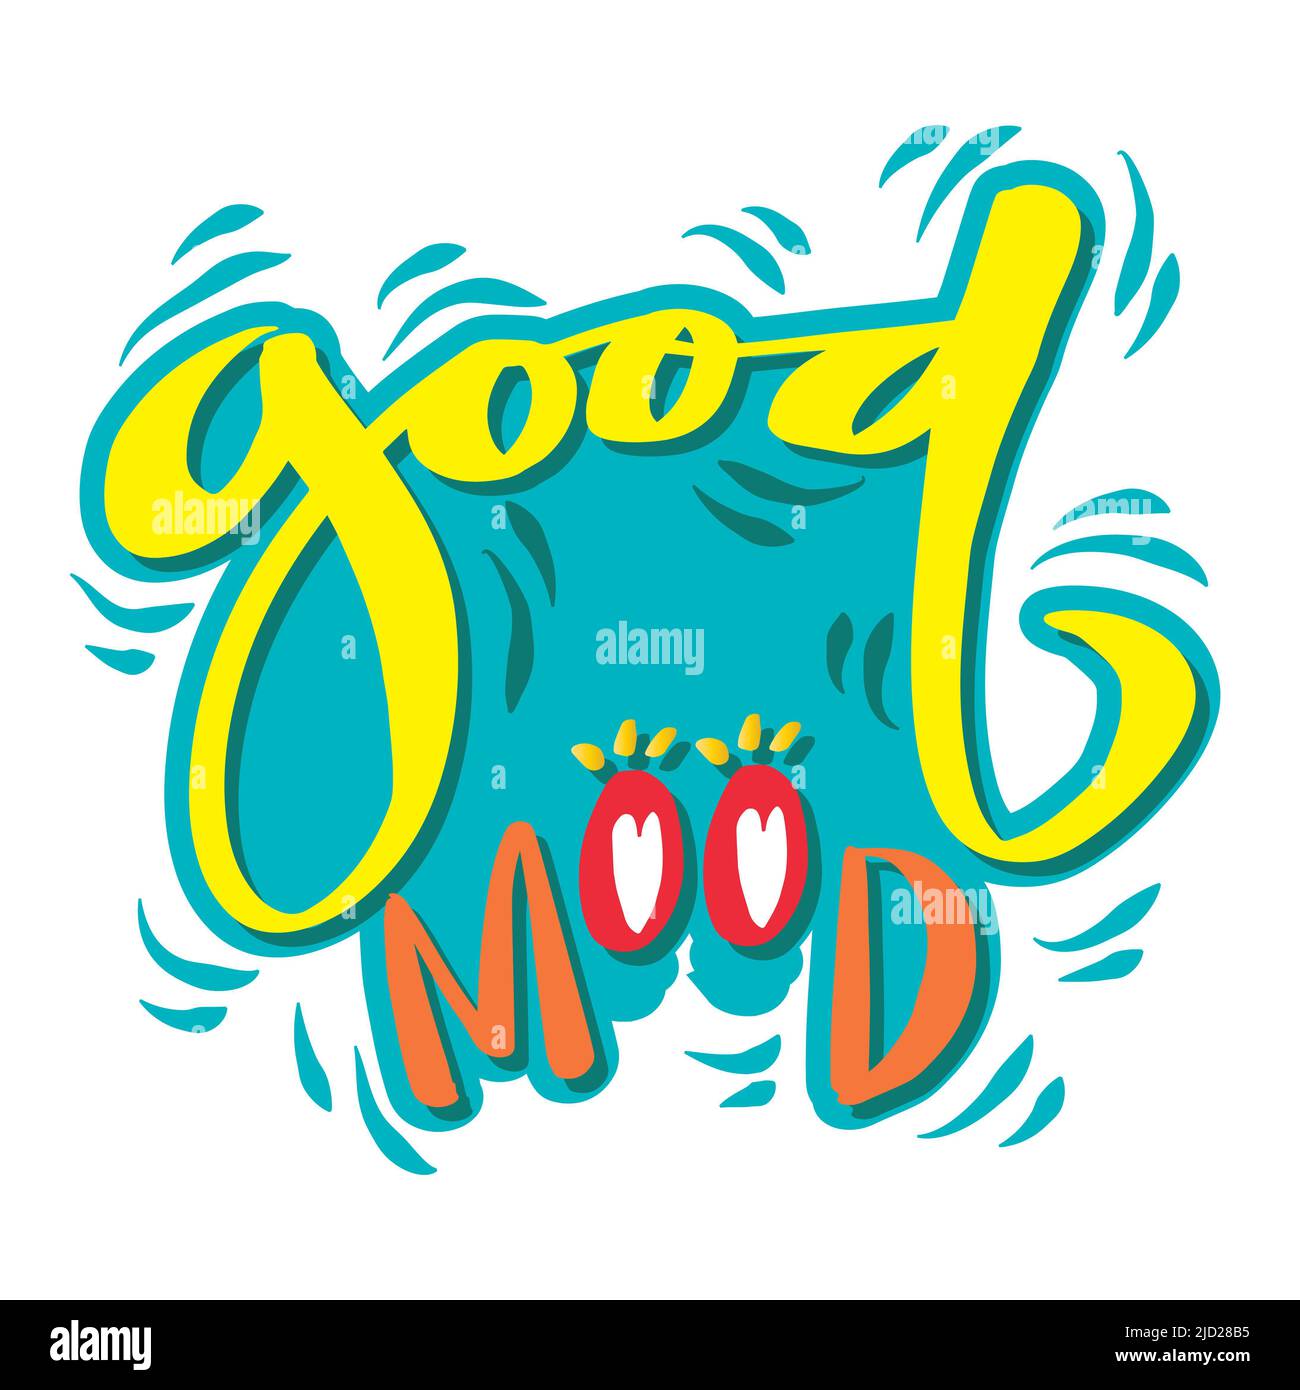 Good mood hand lettering poster Stock Photo